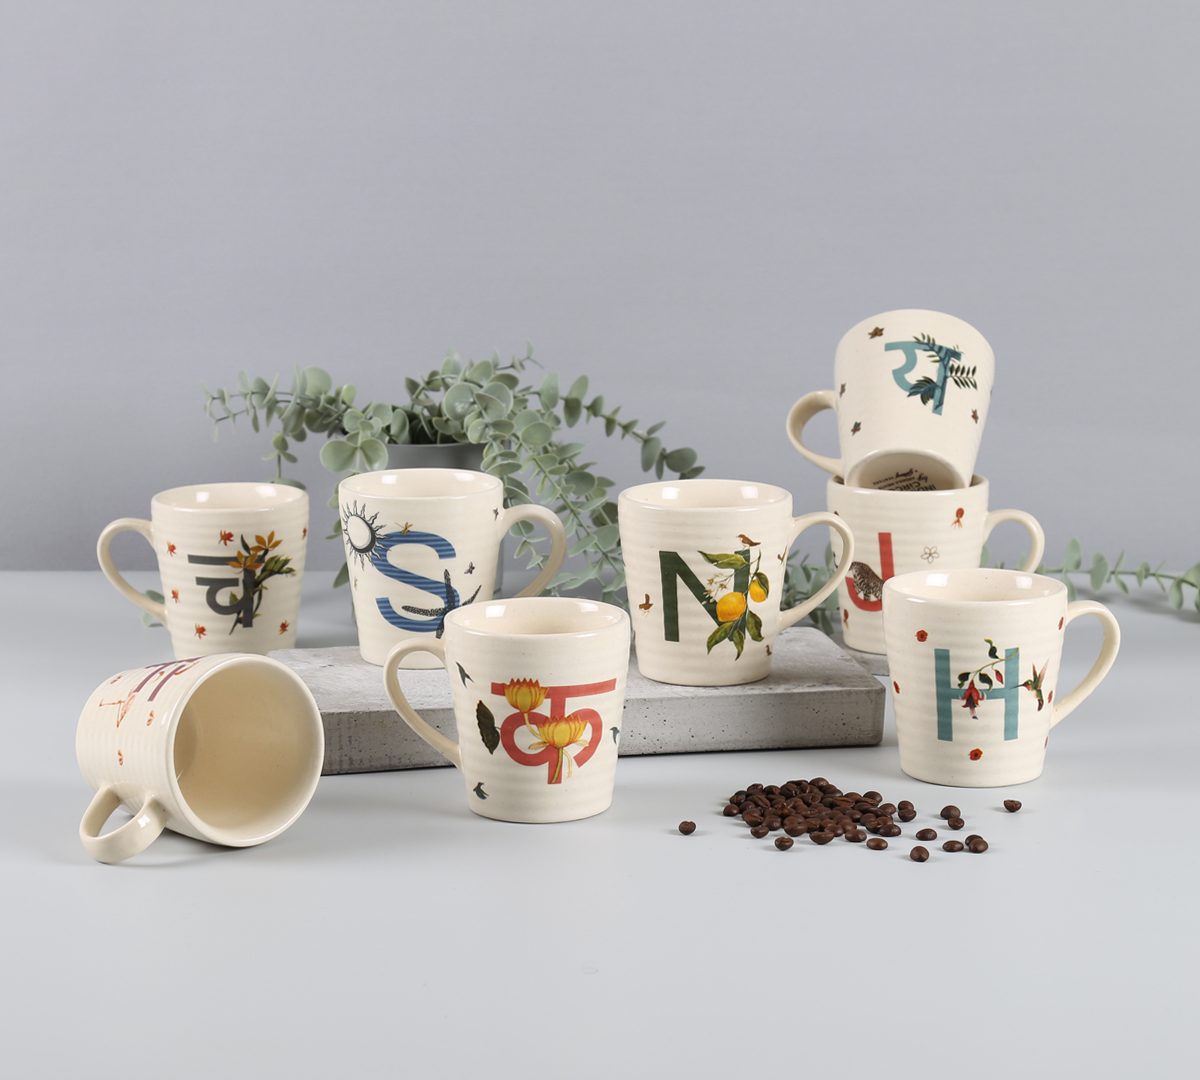 Alphabet Mugs - a way to make your gift more personalized!